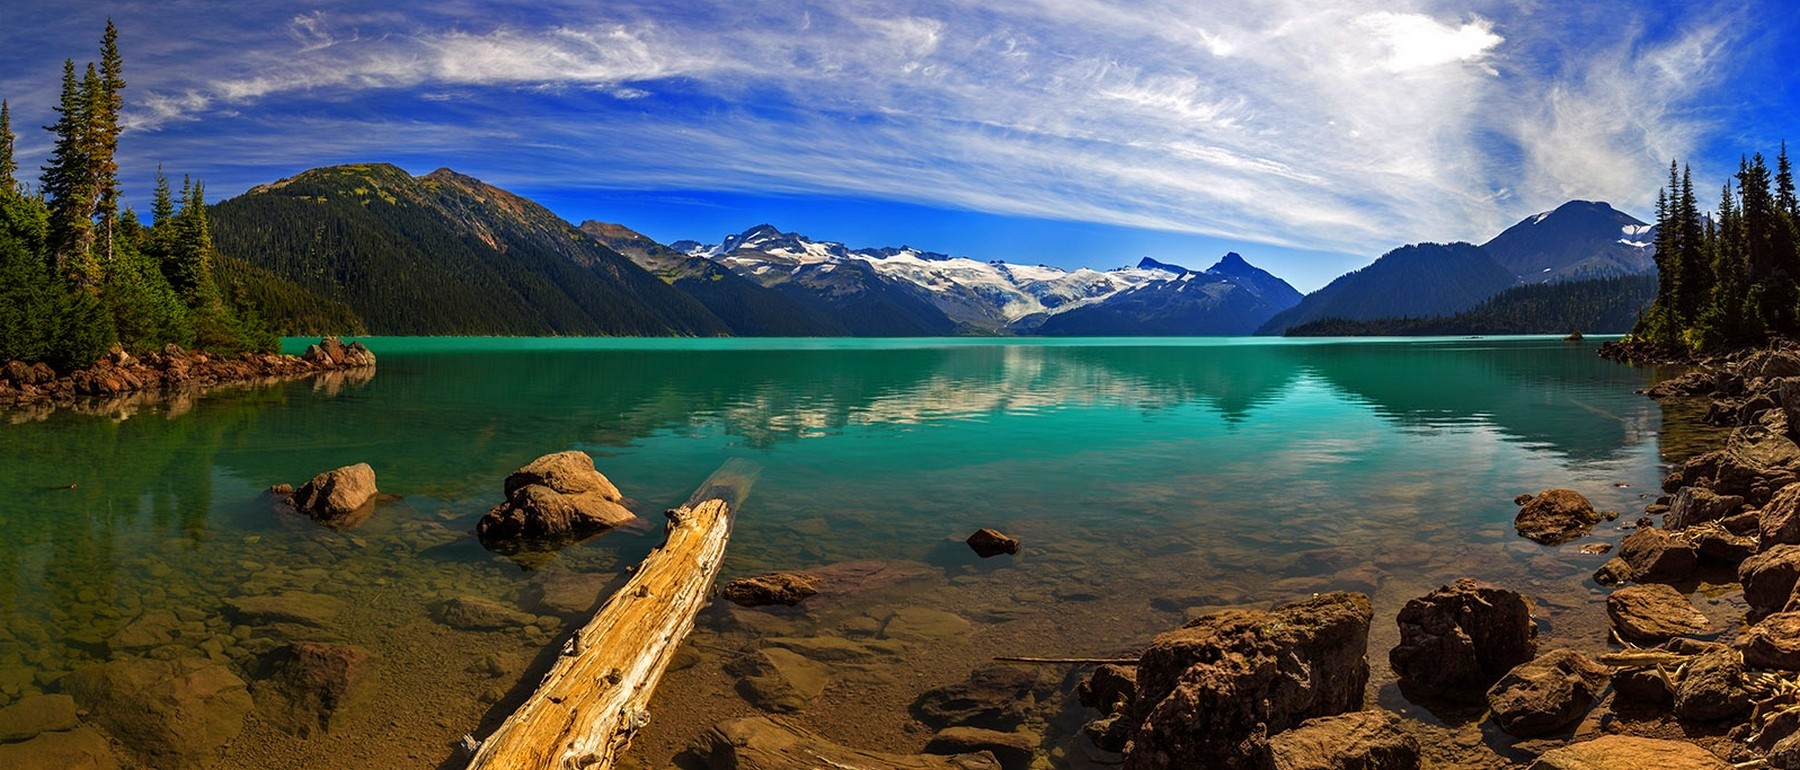 General 1800x770 lake British Columbia Canada mountains forest clouds turquoise snowy peak summer nature blue white panorama water landscape